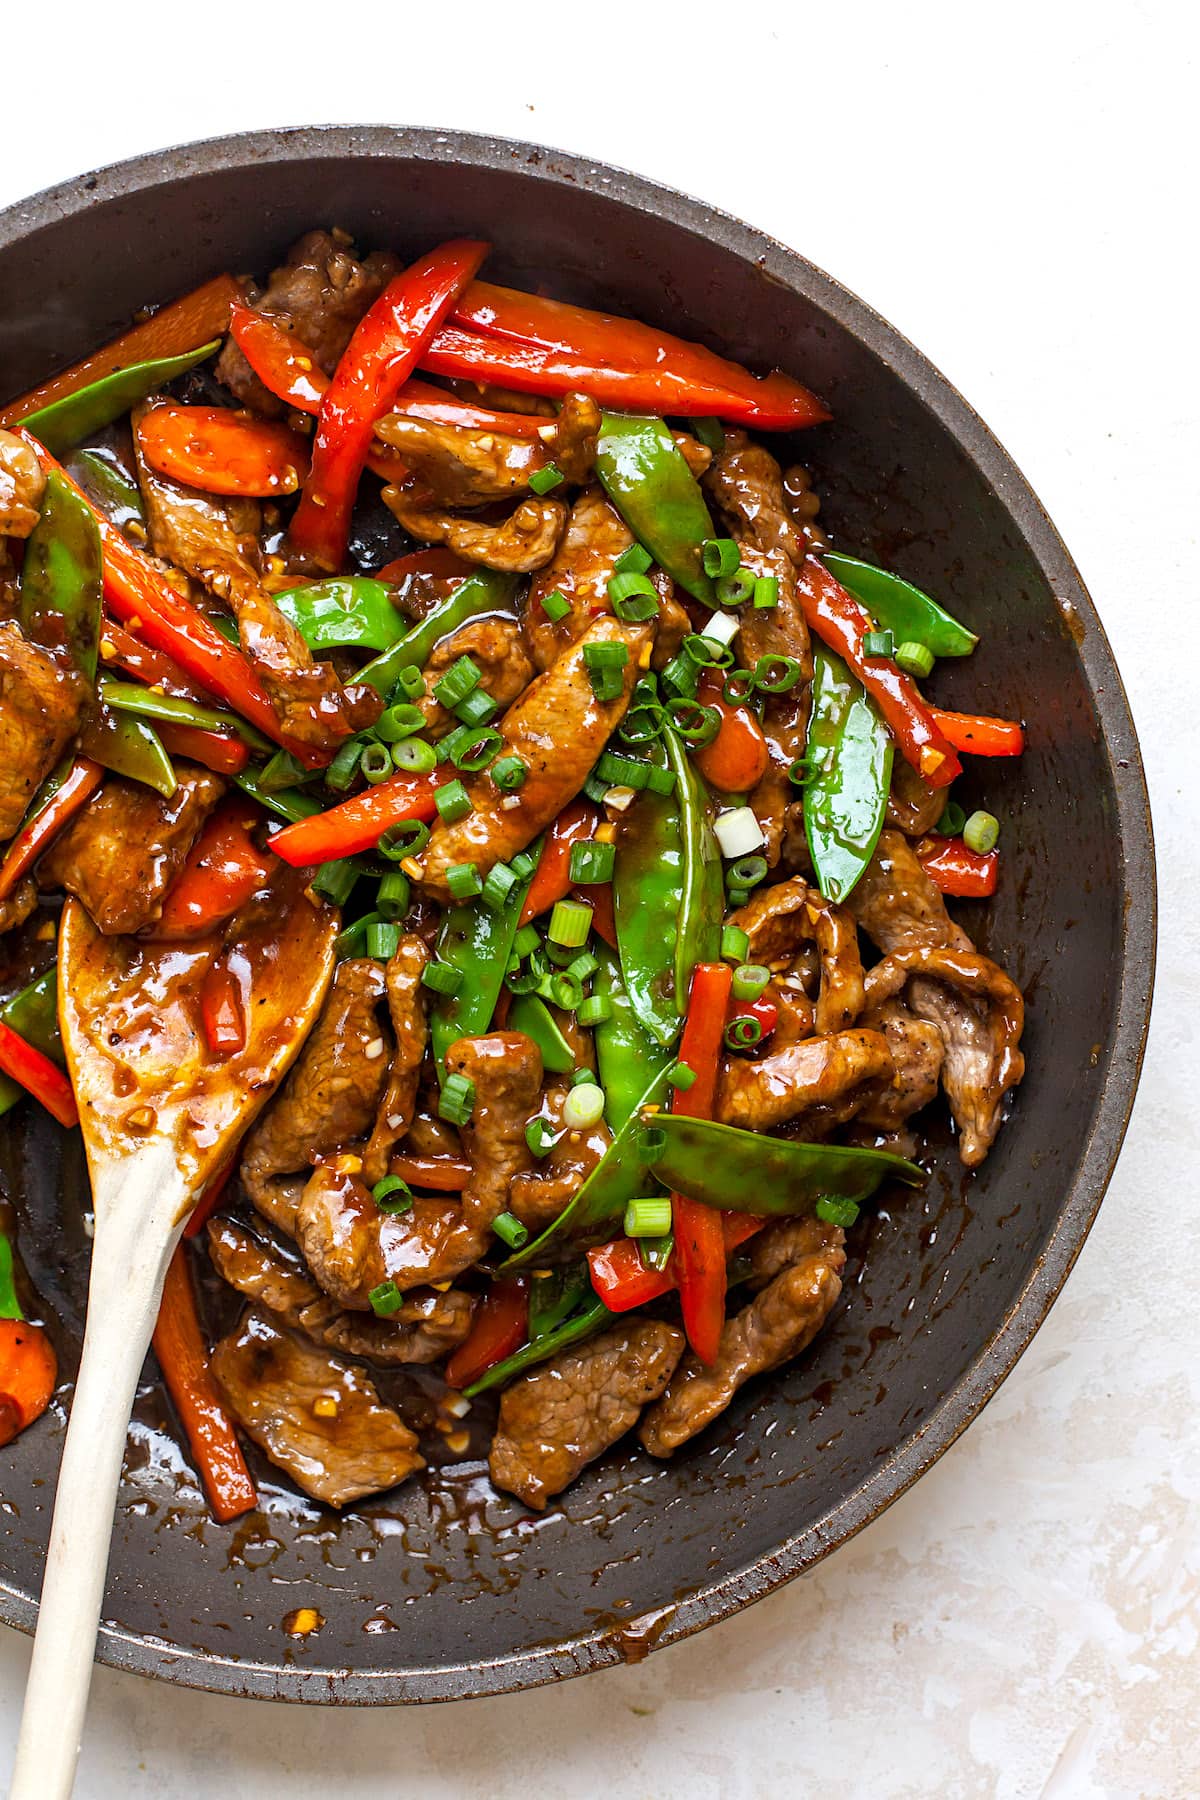 how long to cook beef stir fry meat